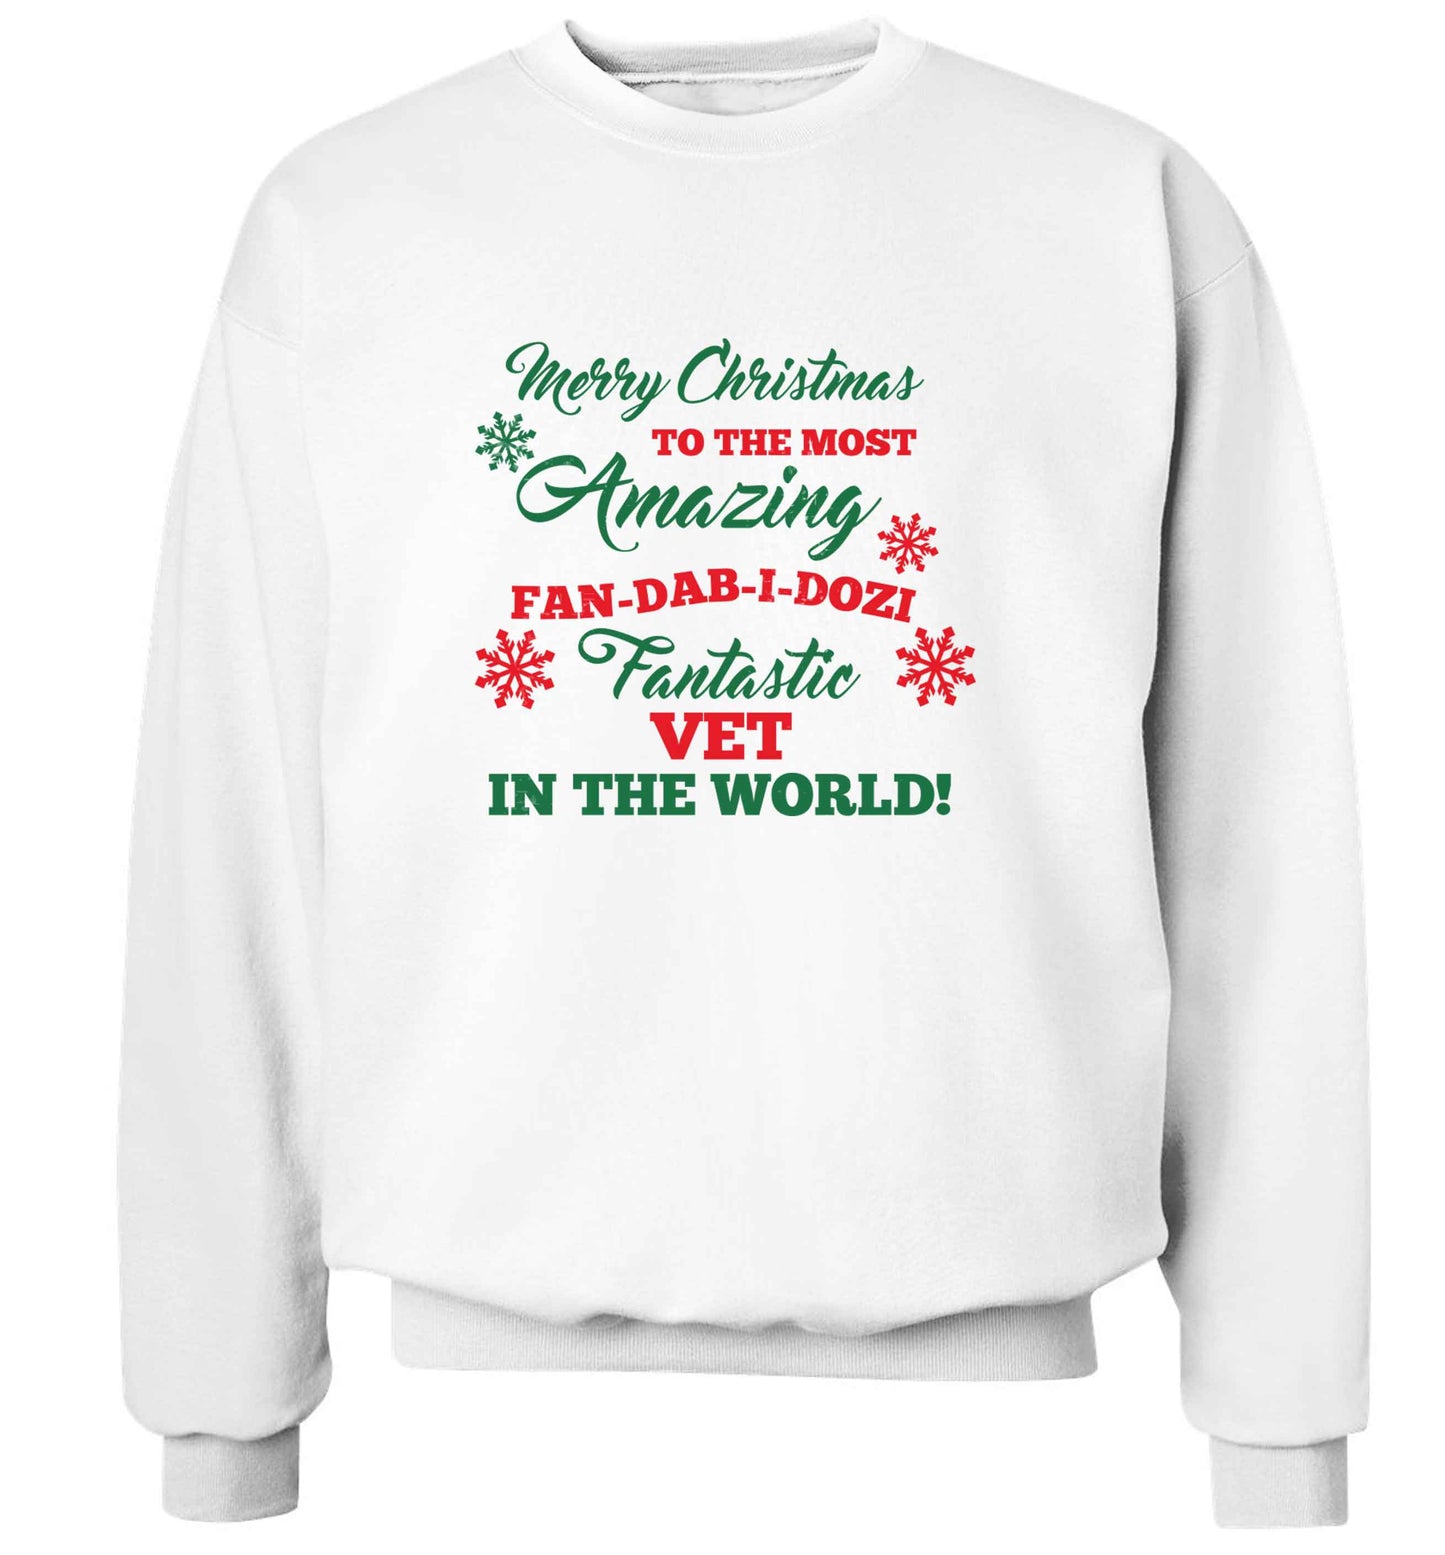 Merry Christmas to the most amazing vet in the world! adult's unisex white sweater 2XL